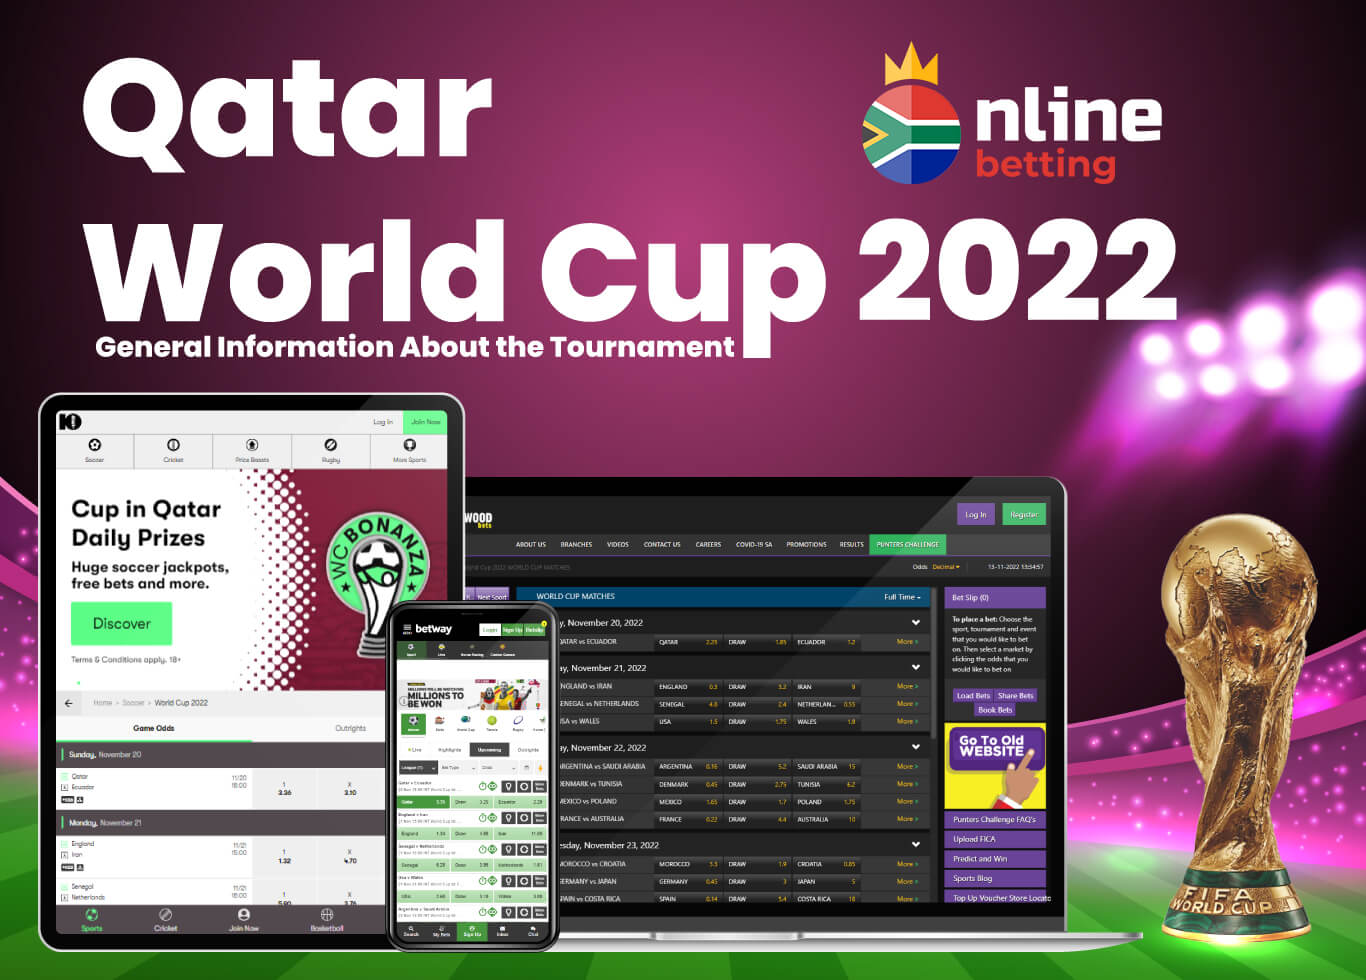 Qatar World Cup 2022 - General Information About the Tournament